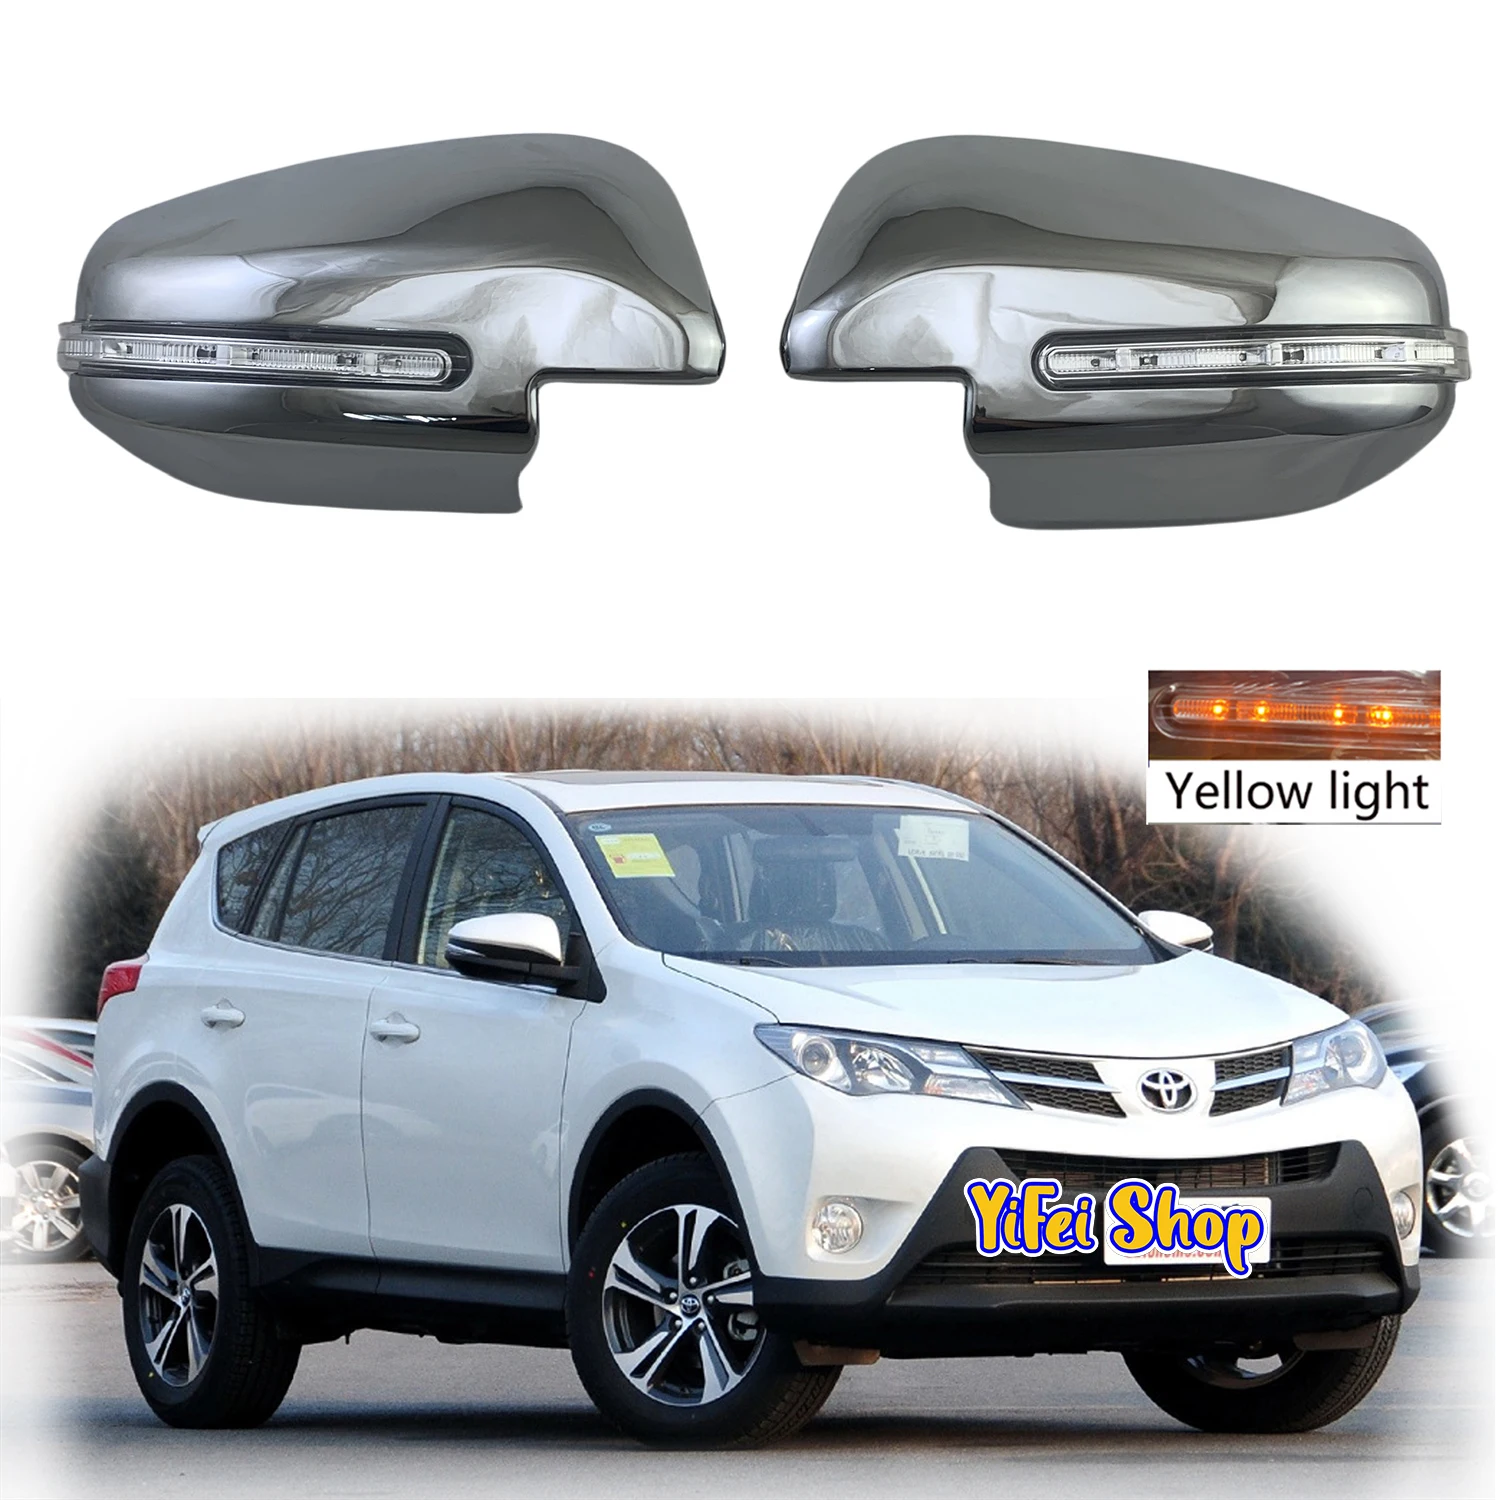 

2014 2015 2016 2017 2018 2019 For Toyota RAV4 RAV 4 Car ABS Chrome Rearview Accessories Plated Trim Door Mirror Cover With LED